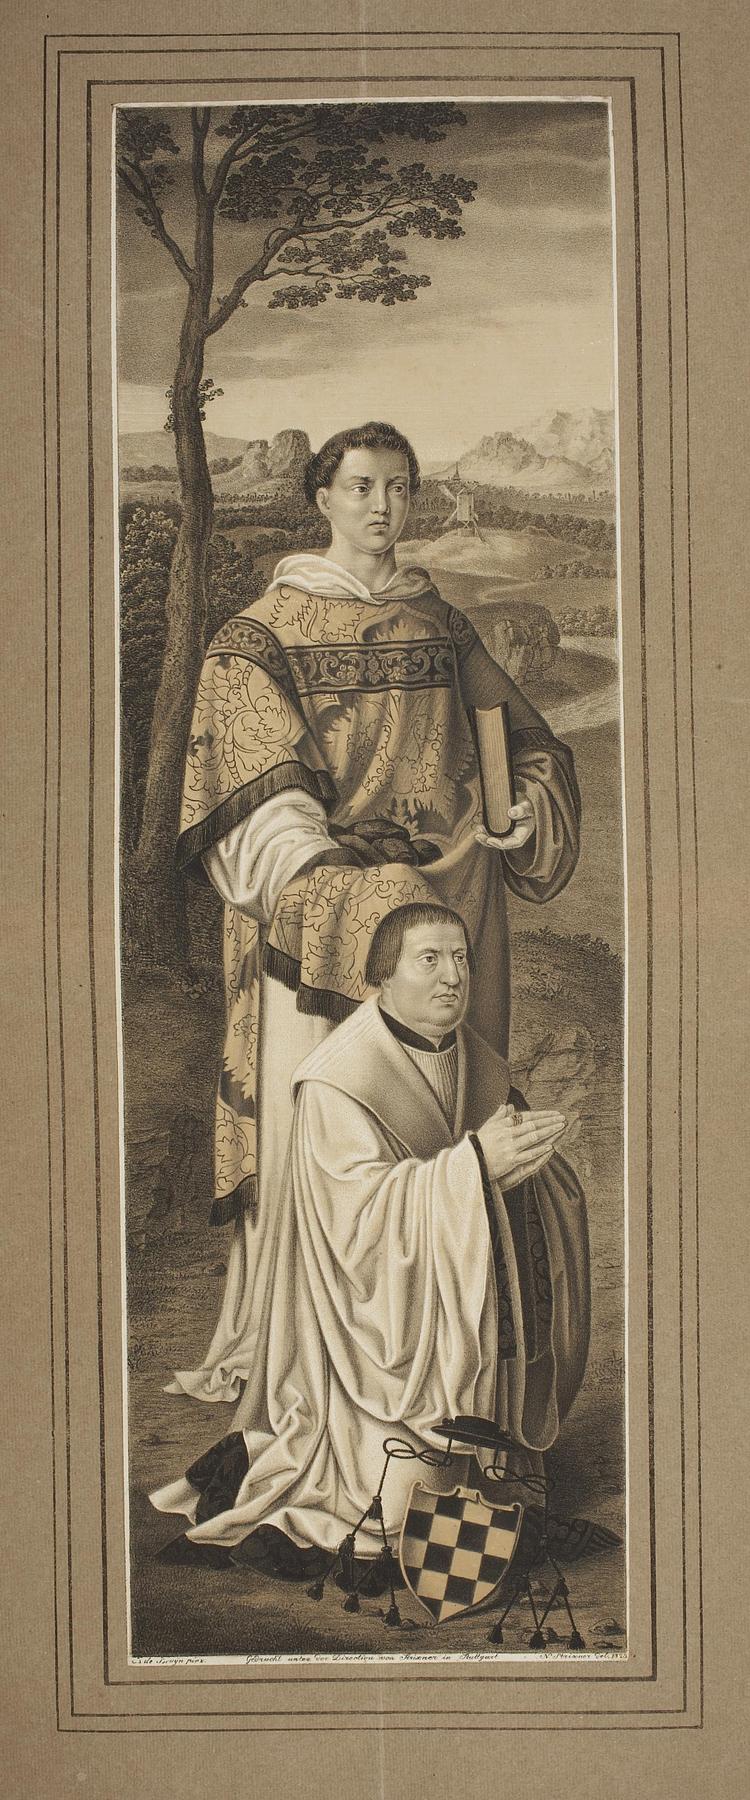 Saint Stephan with the Donor Stephan Vell von Wevelinghoven, E1221